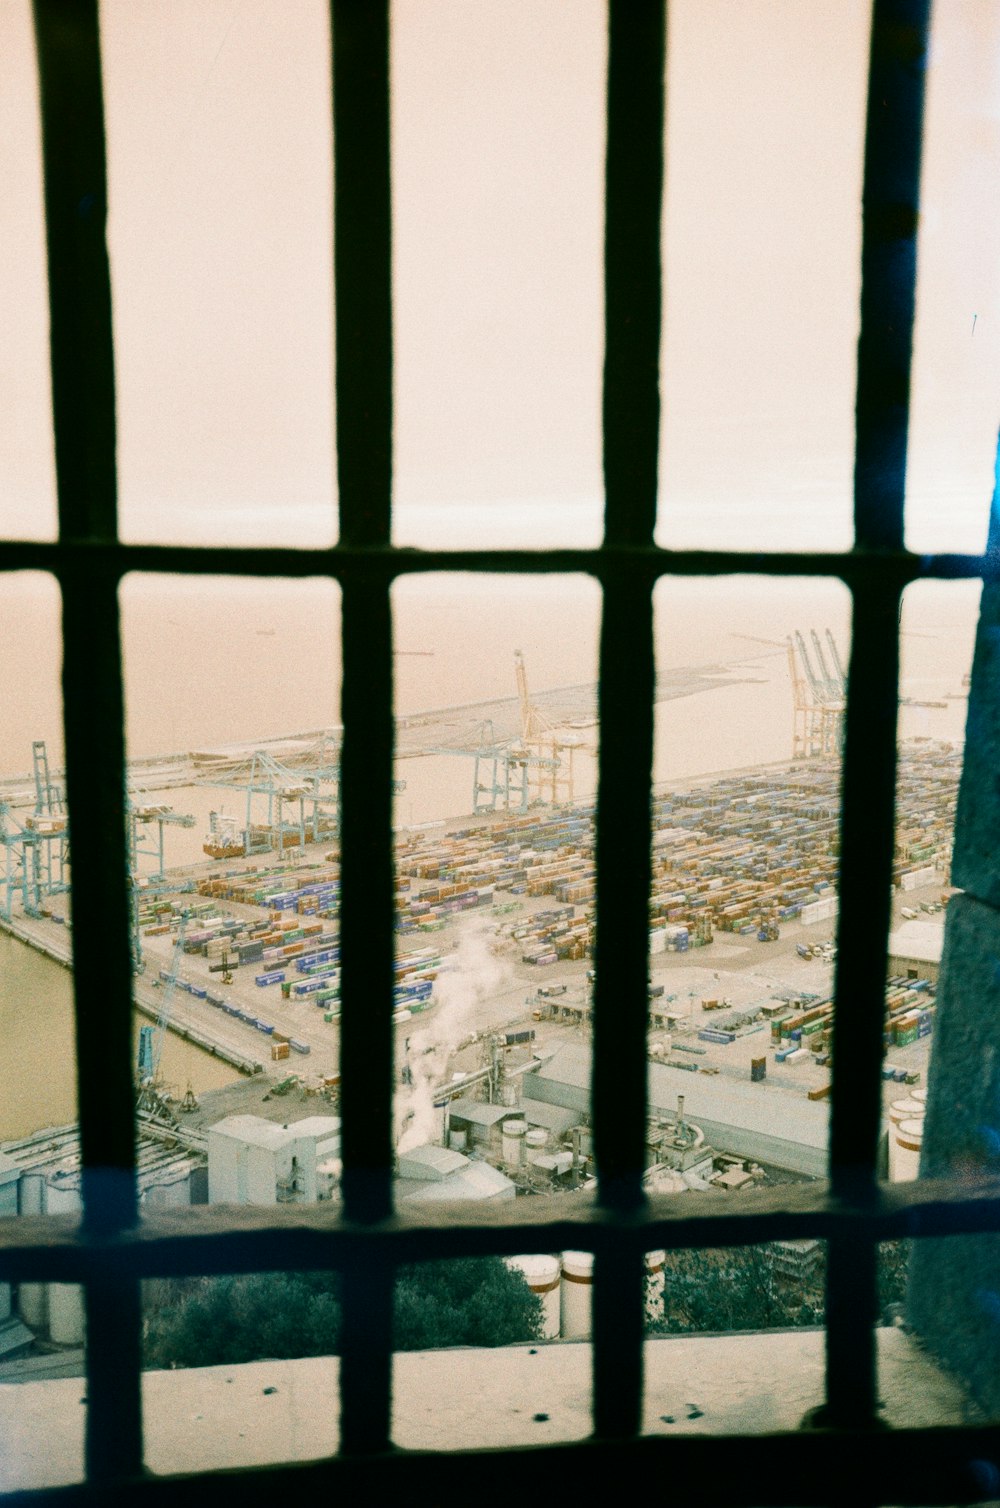 a view of a large industrial area through a window